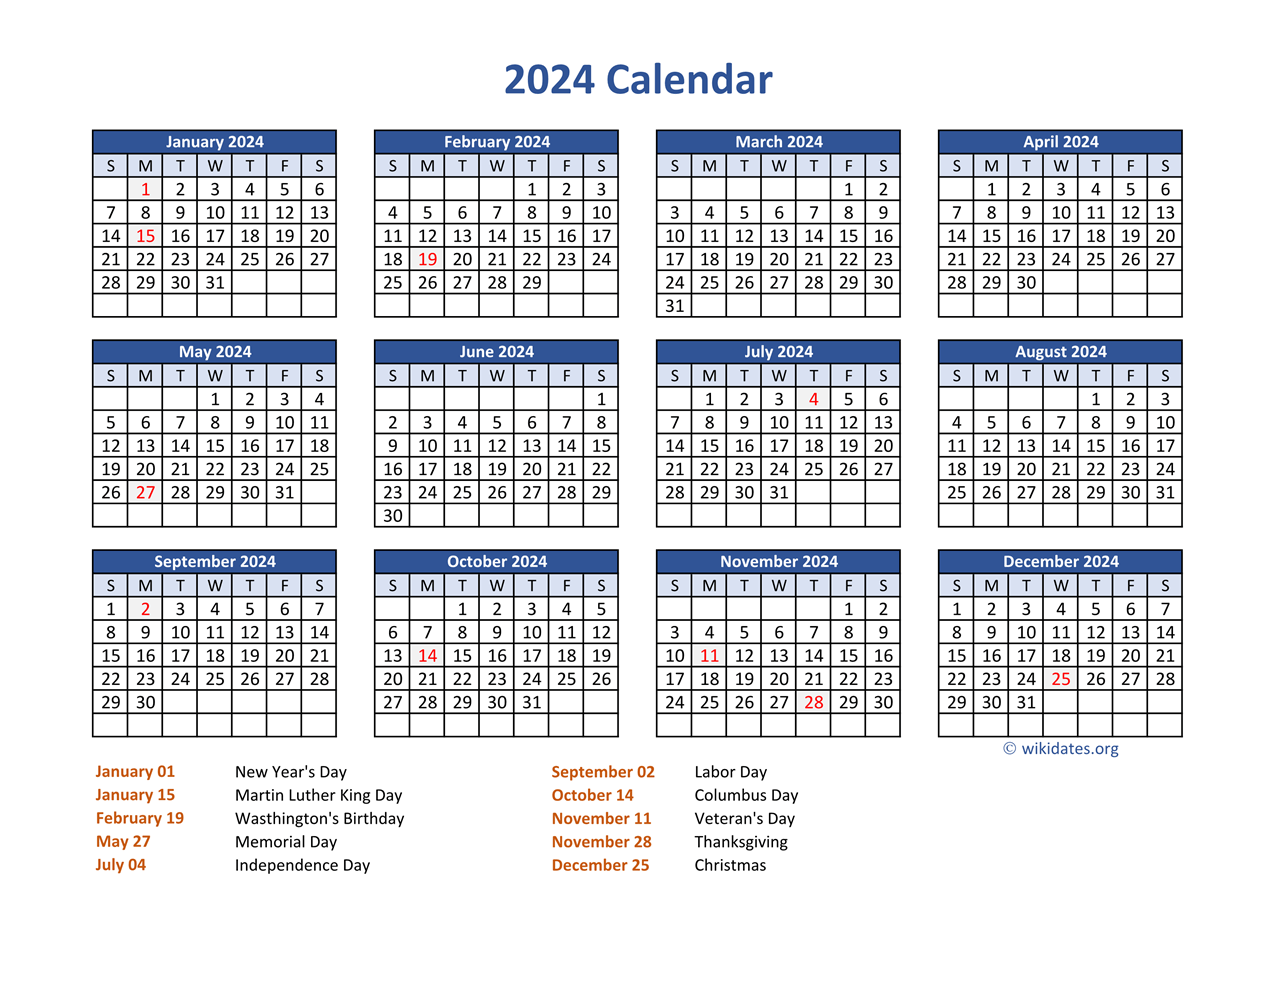 Pdf Calendar 2024 With Federal Holidays | Wikidates for 2024 Year Printable Calendar With Holidays